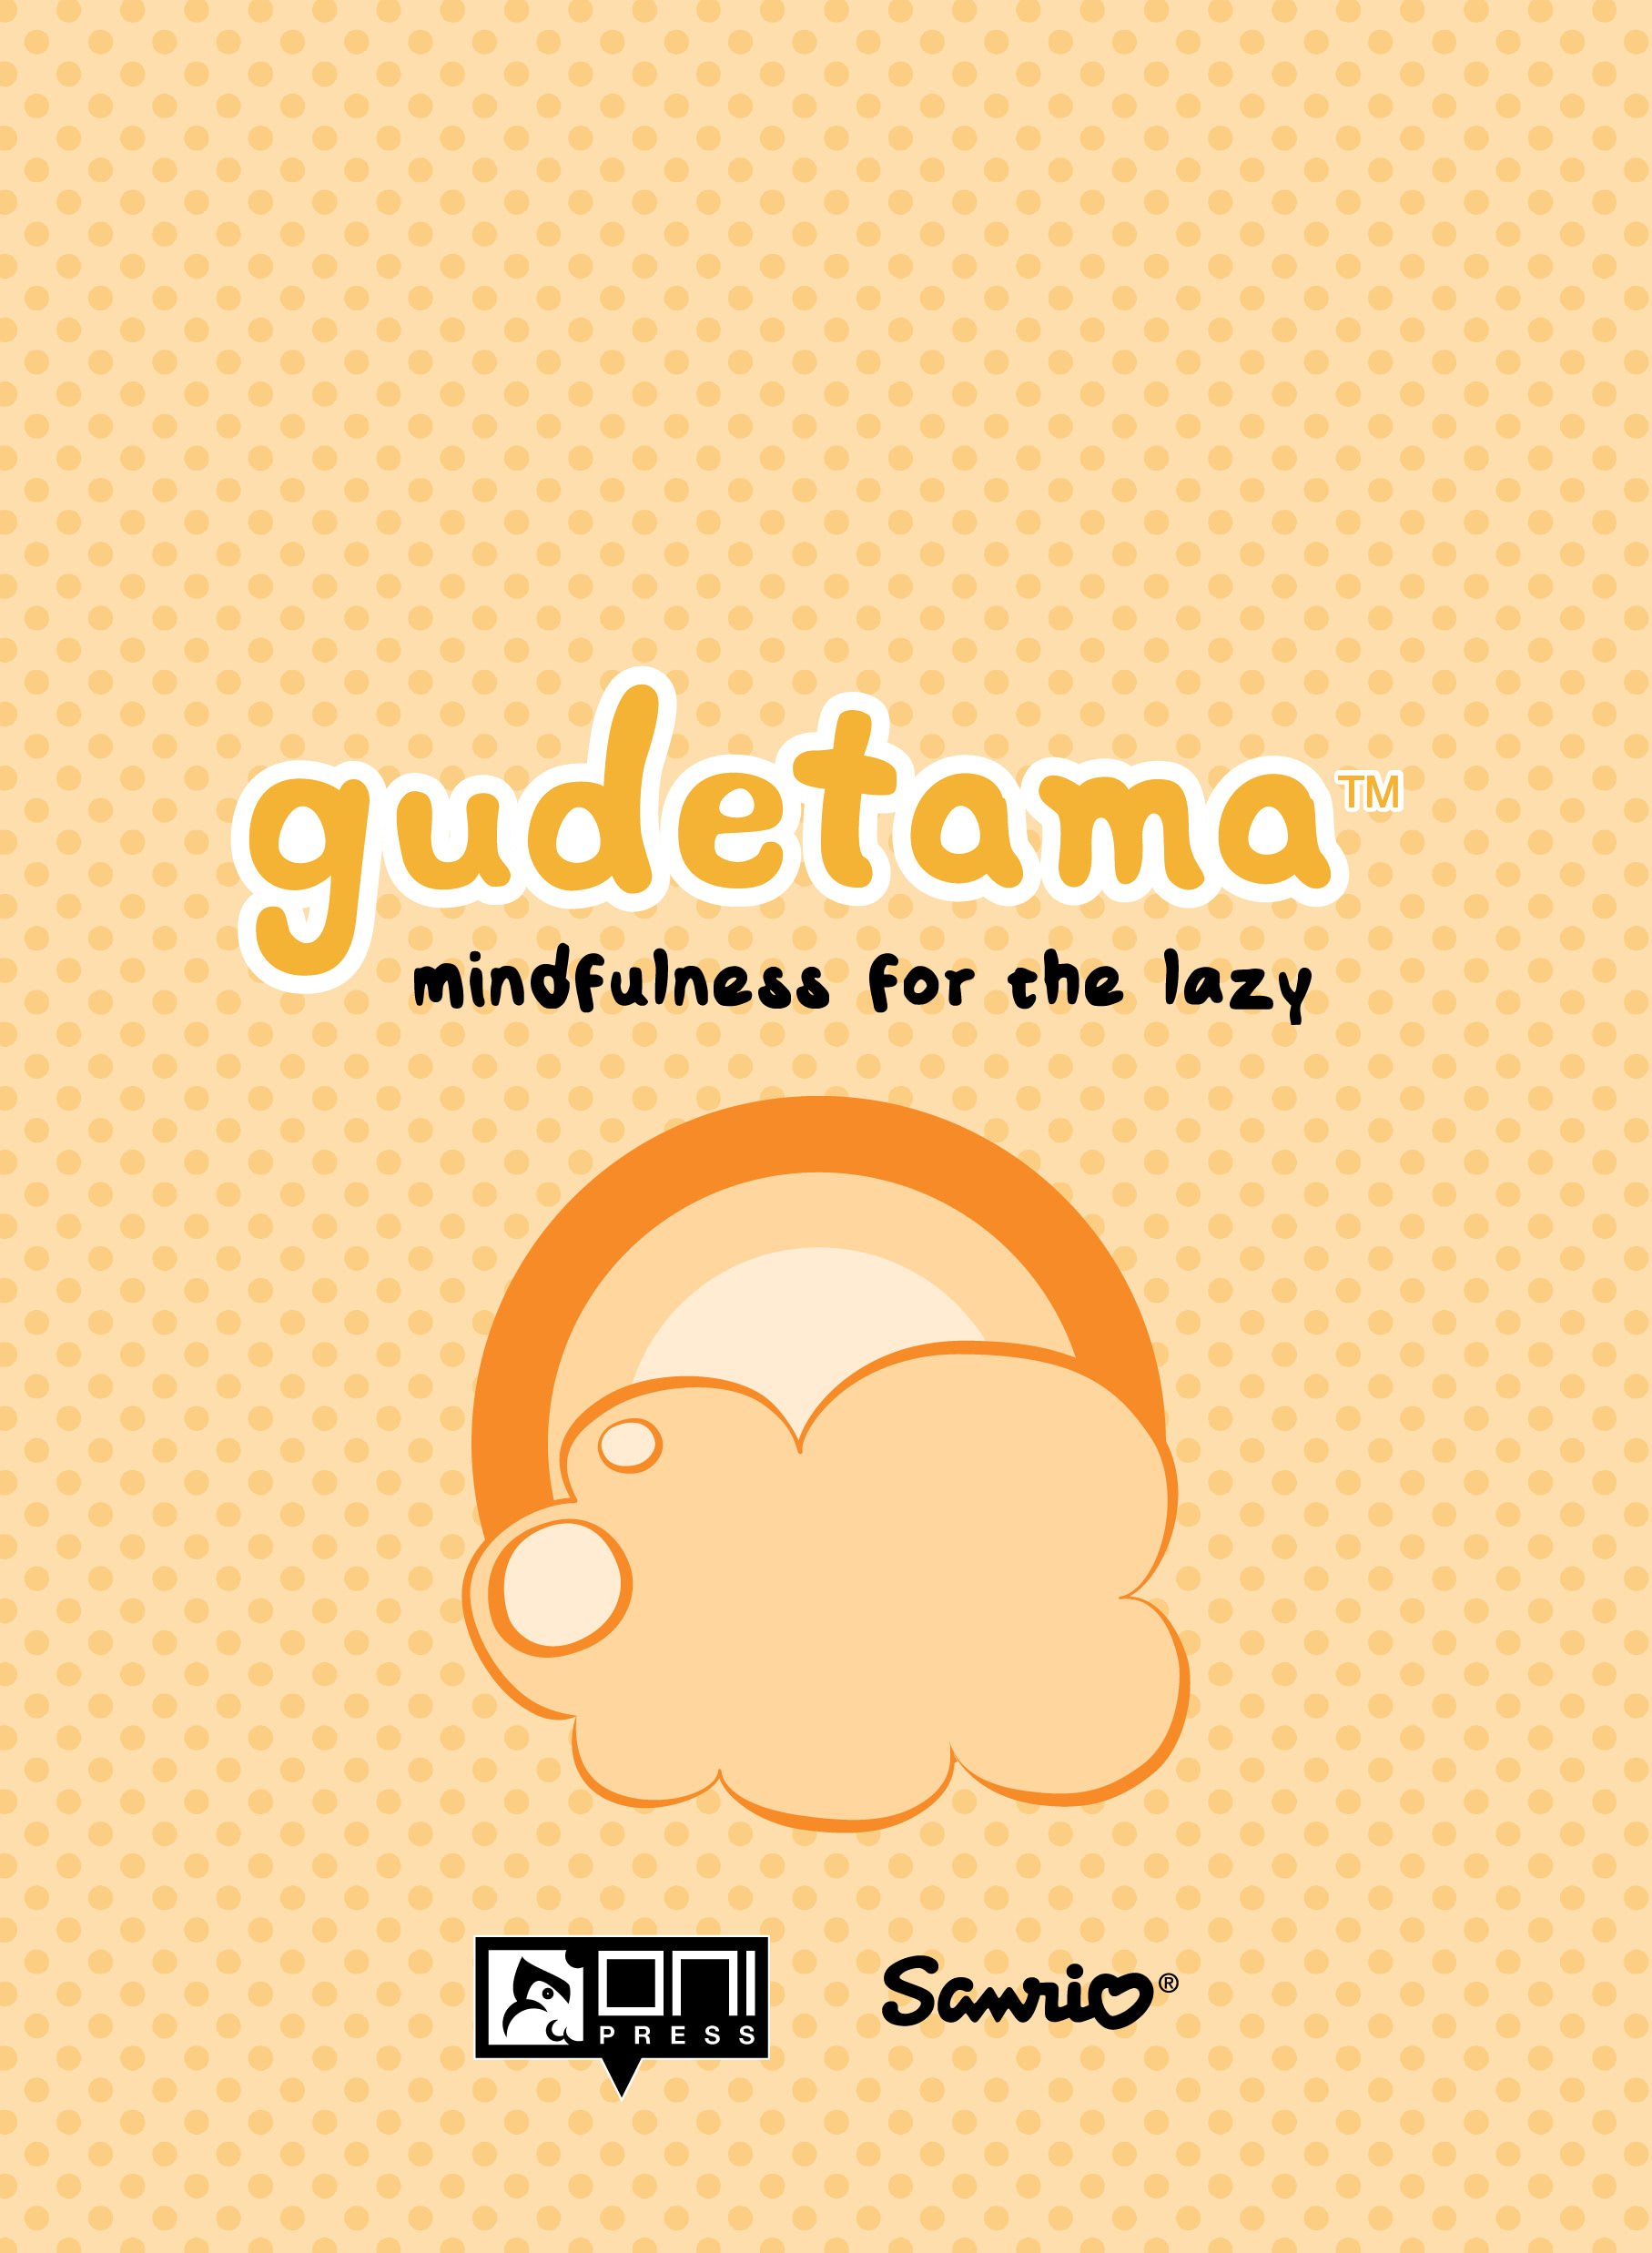 Read online Gudetama comic -  Issue # Mindfulness for the Lazy - 2